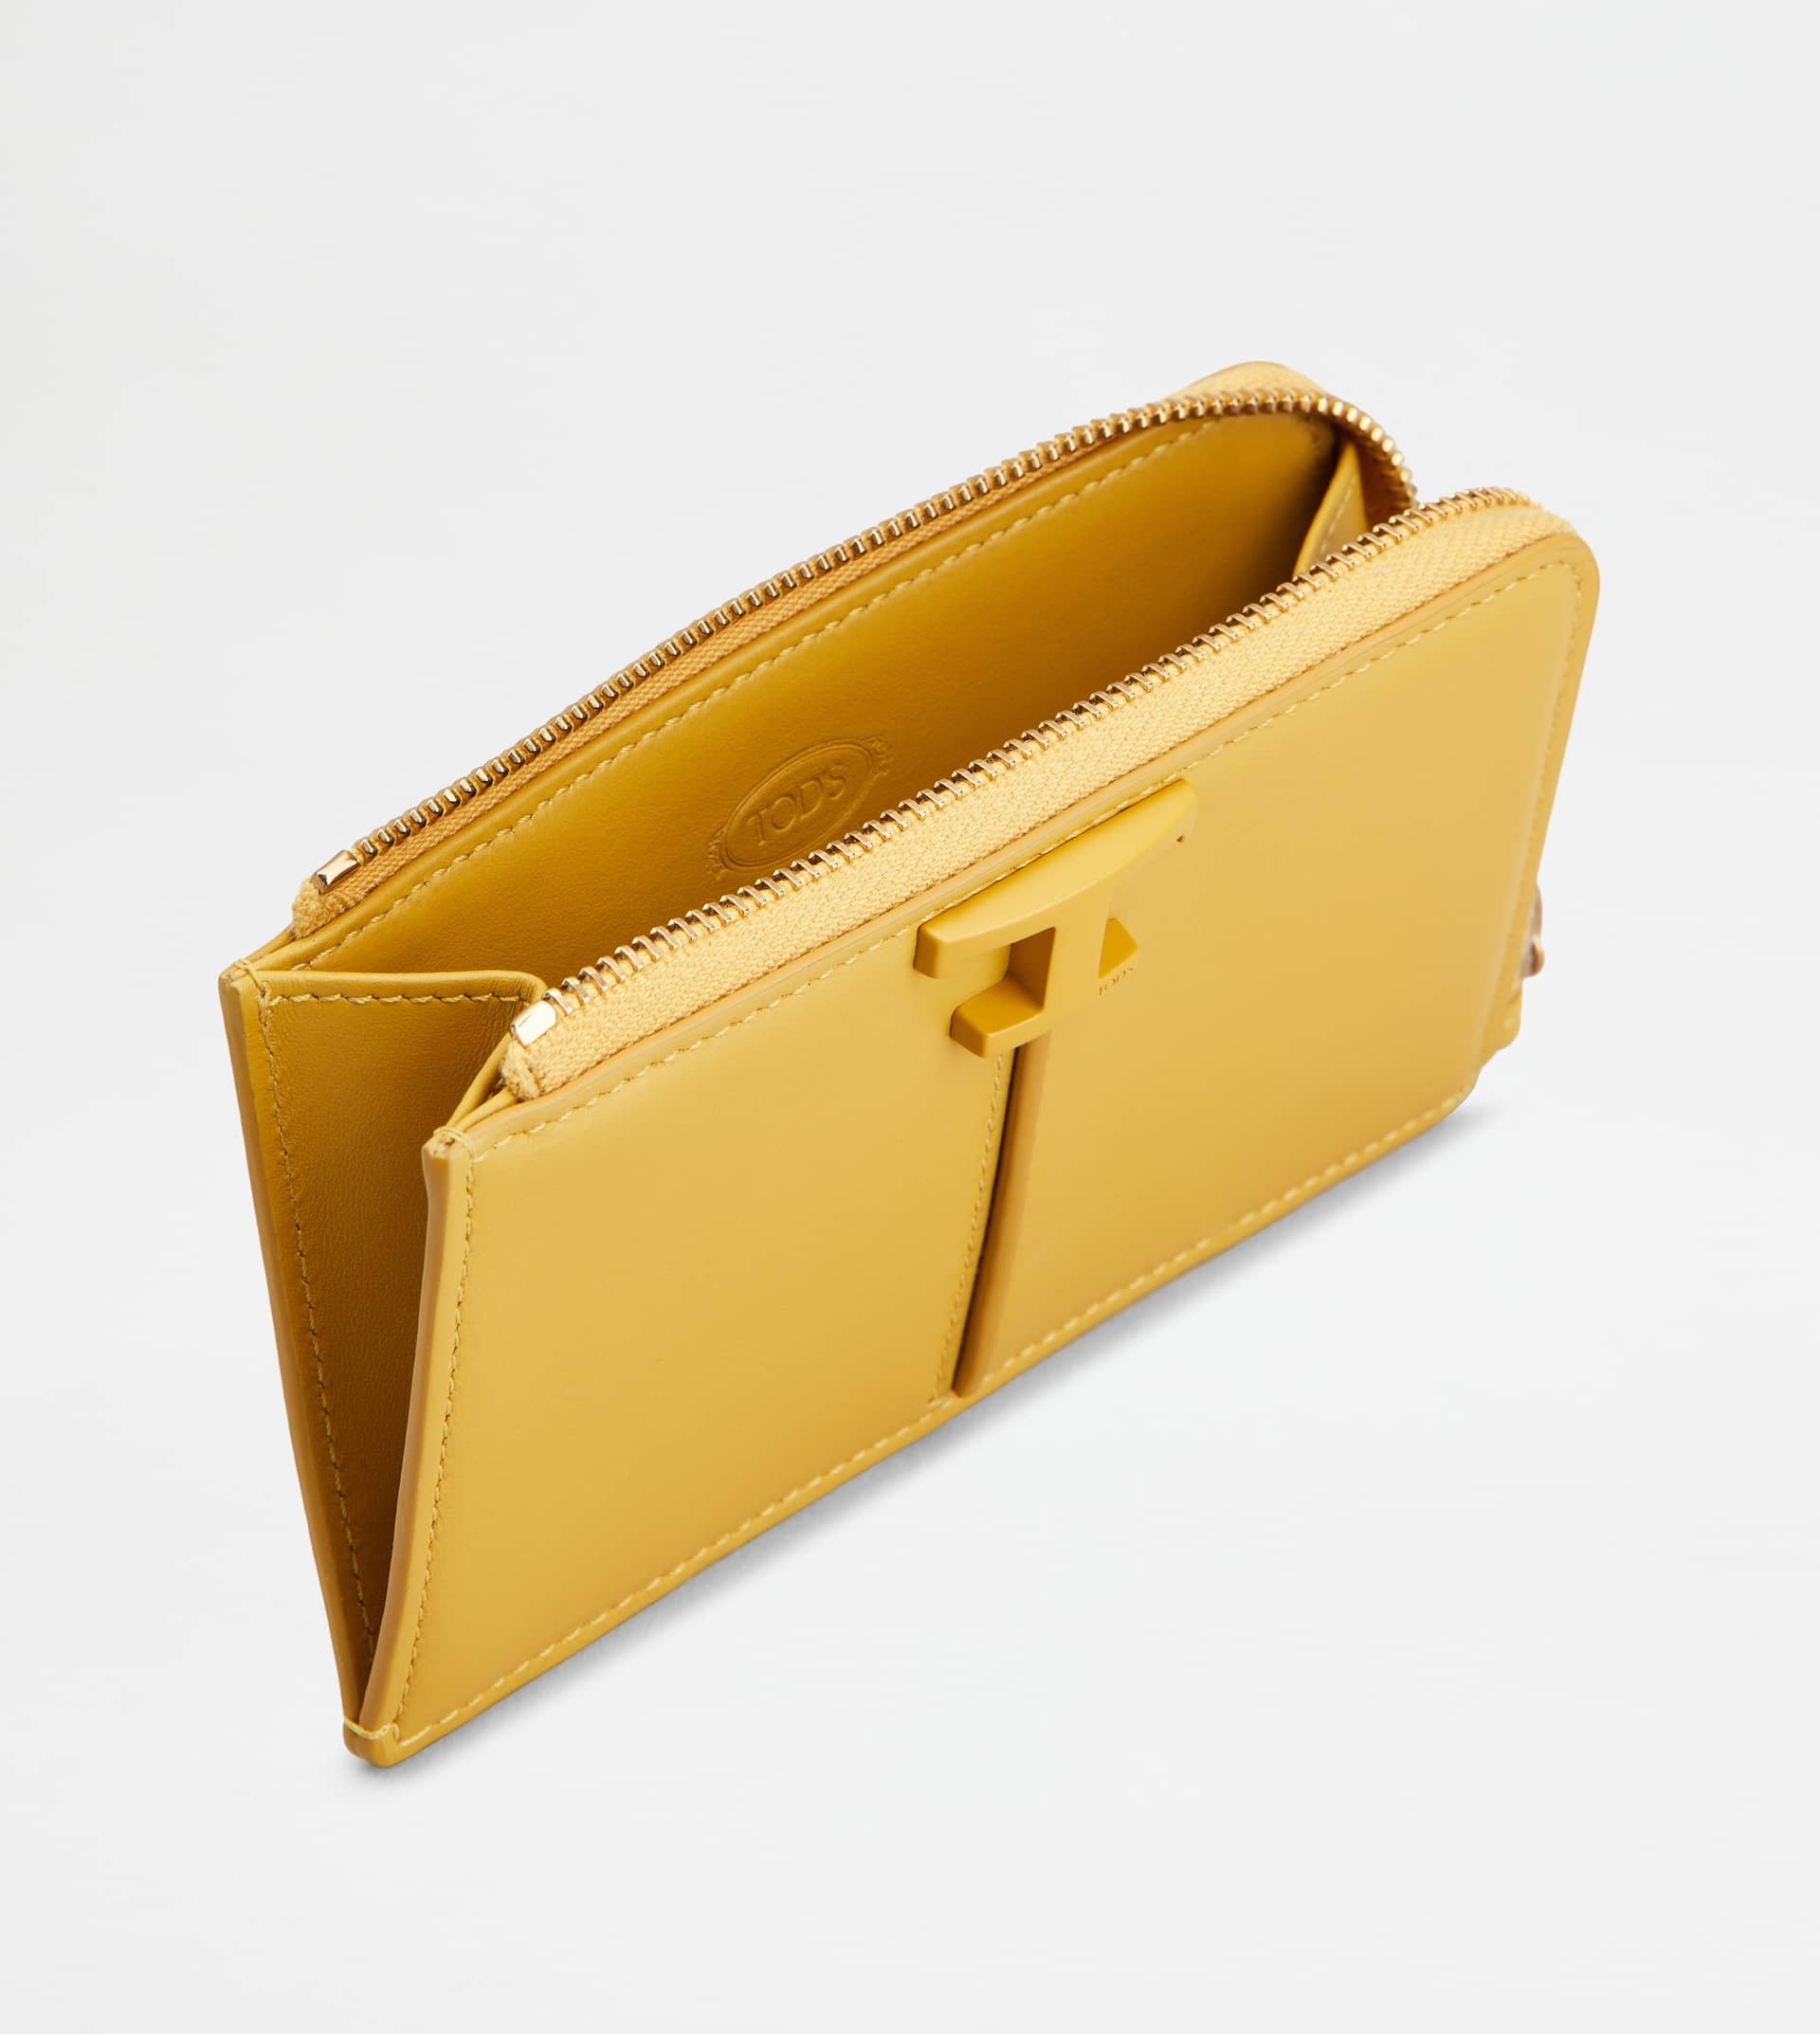 T TIMELESS KEY POUCH IN LEATHER - YELLOW - 2